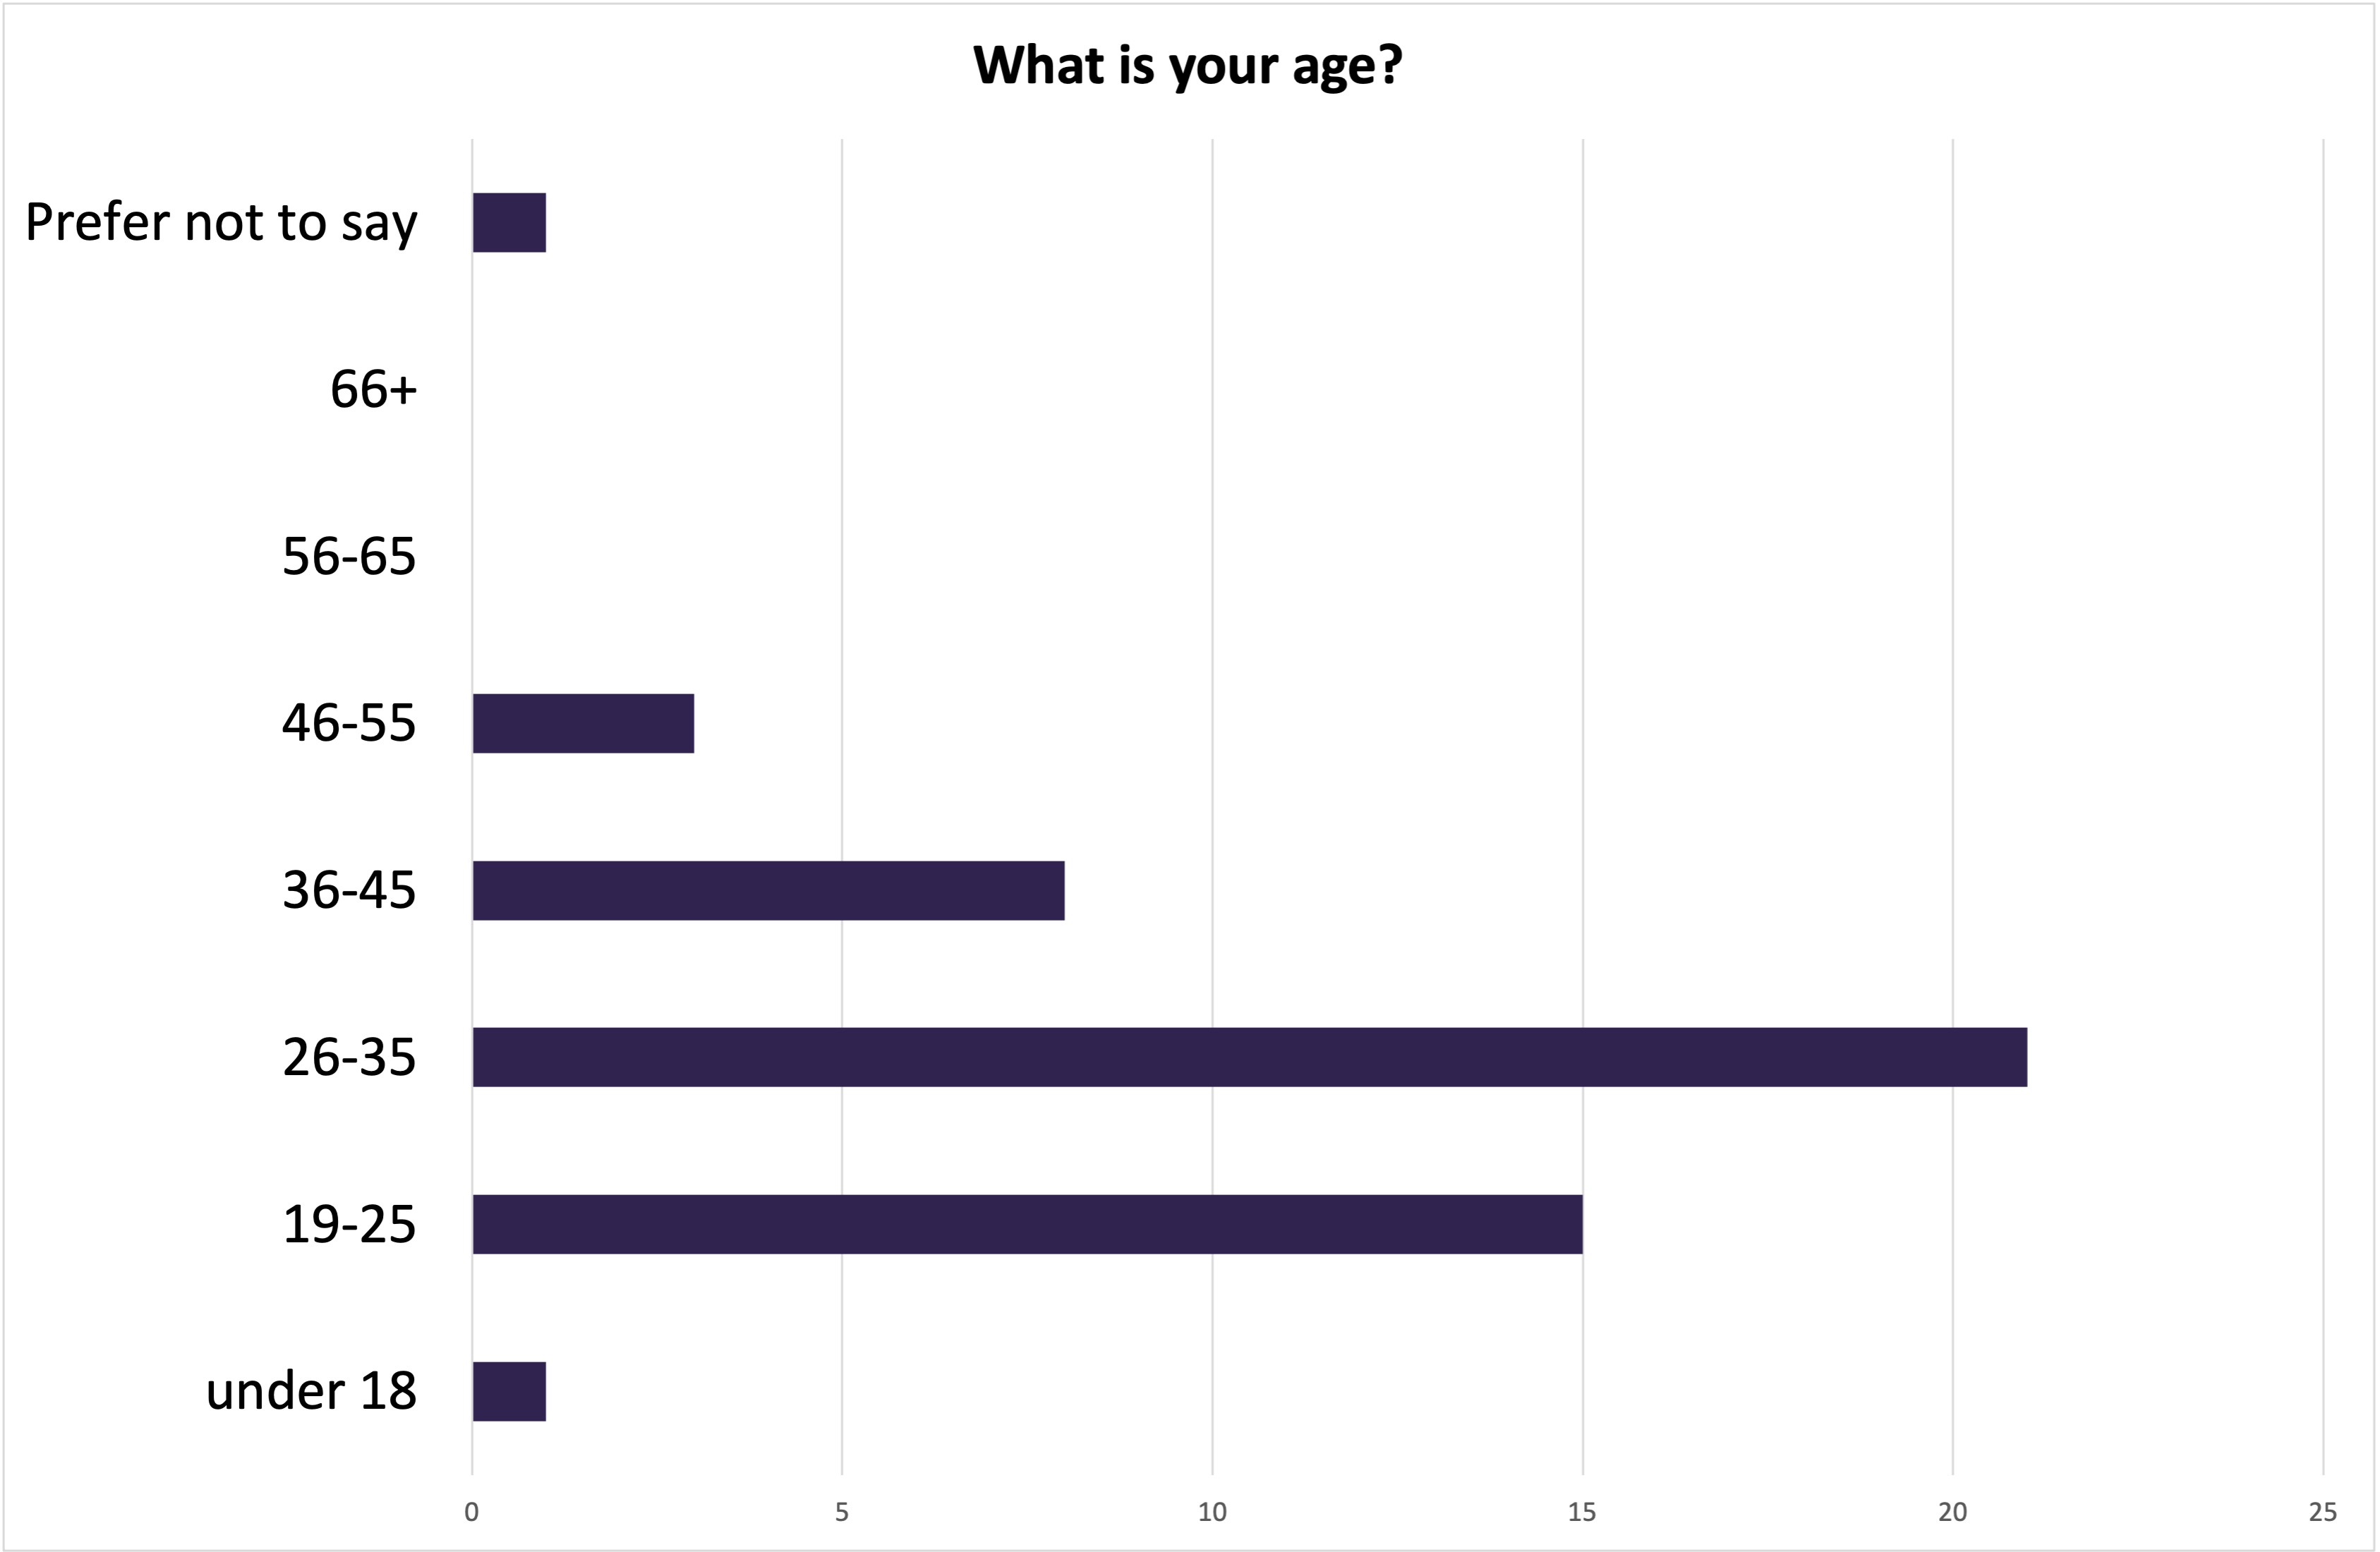 Bar chart of registrants' ages: 1 under 18; 15 19-25; 21 26-35; 8 36-45; 3 46-55; 1 prefer not to say.